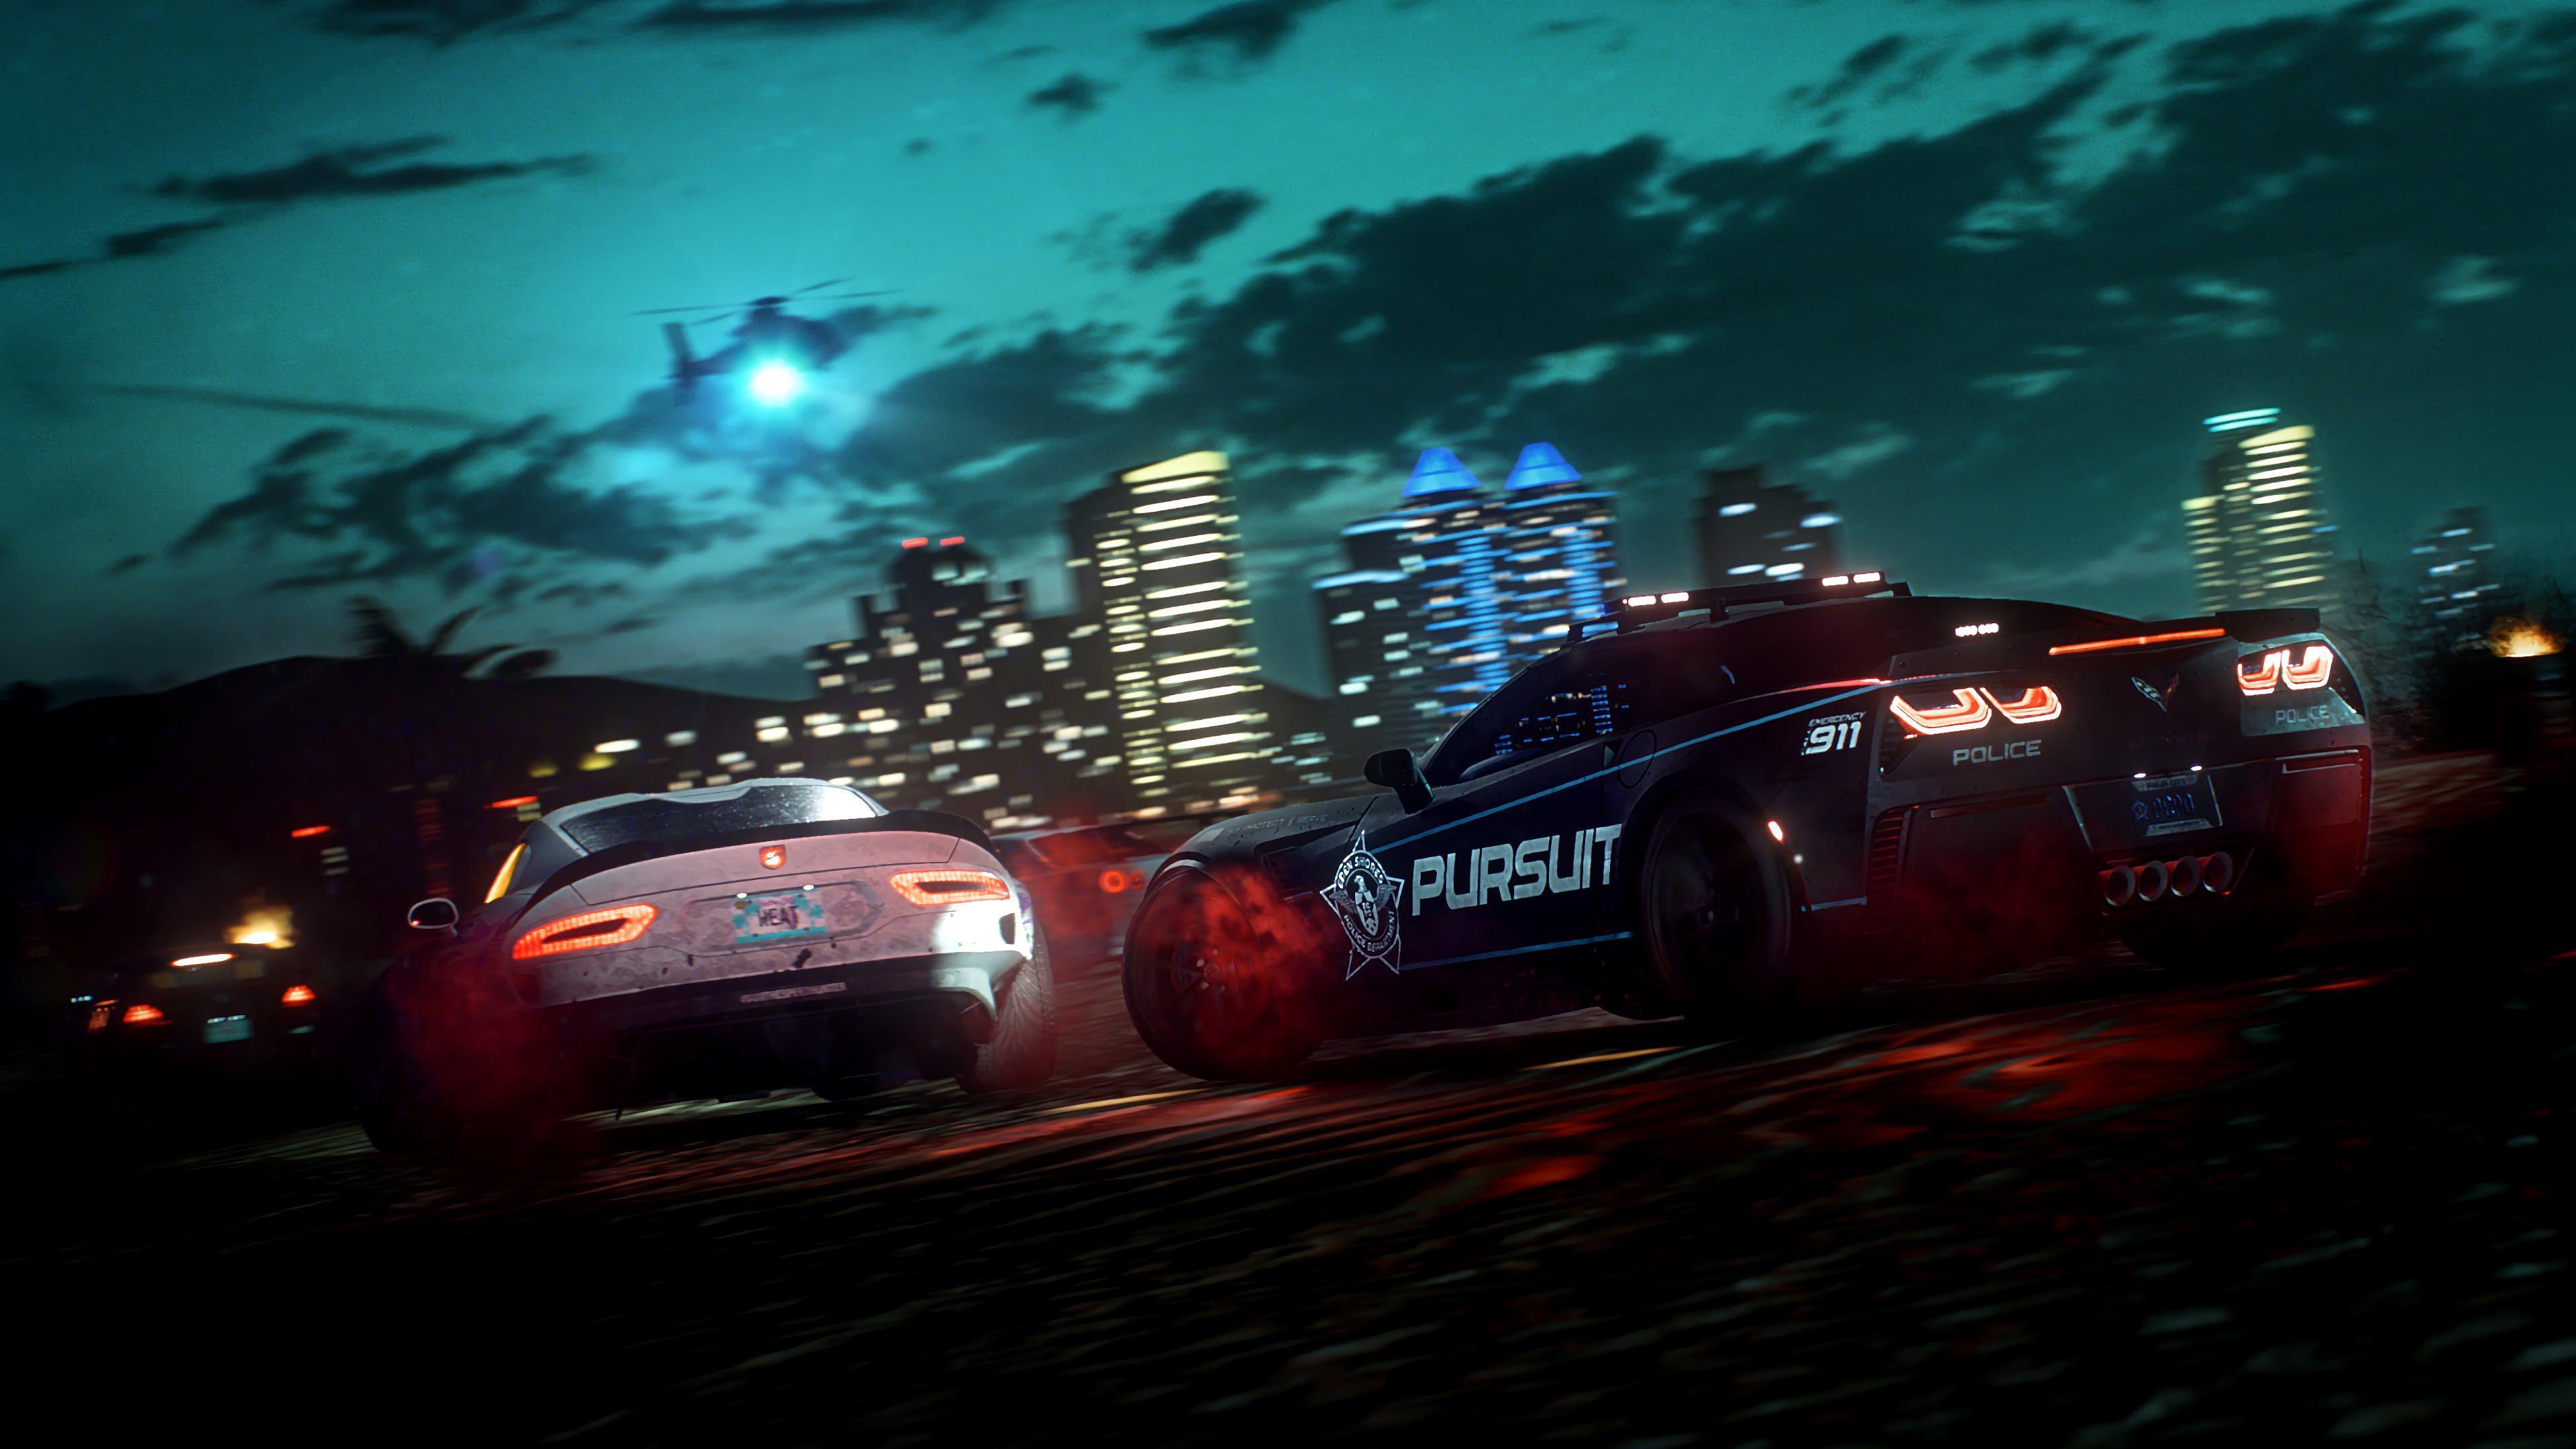 HD wallpaper, Police, 4K, Cars, Need For Speed Heat, Pursuit, Night